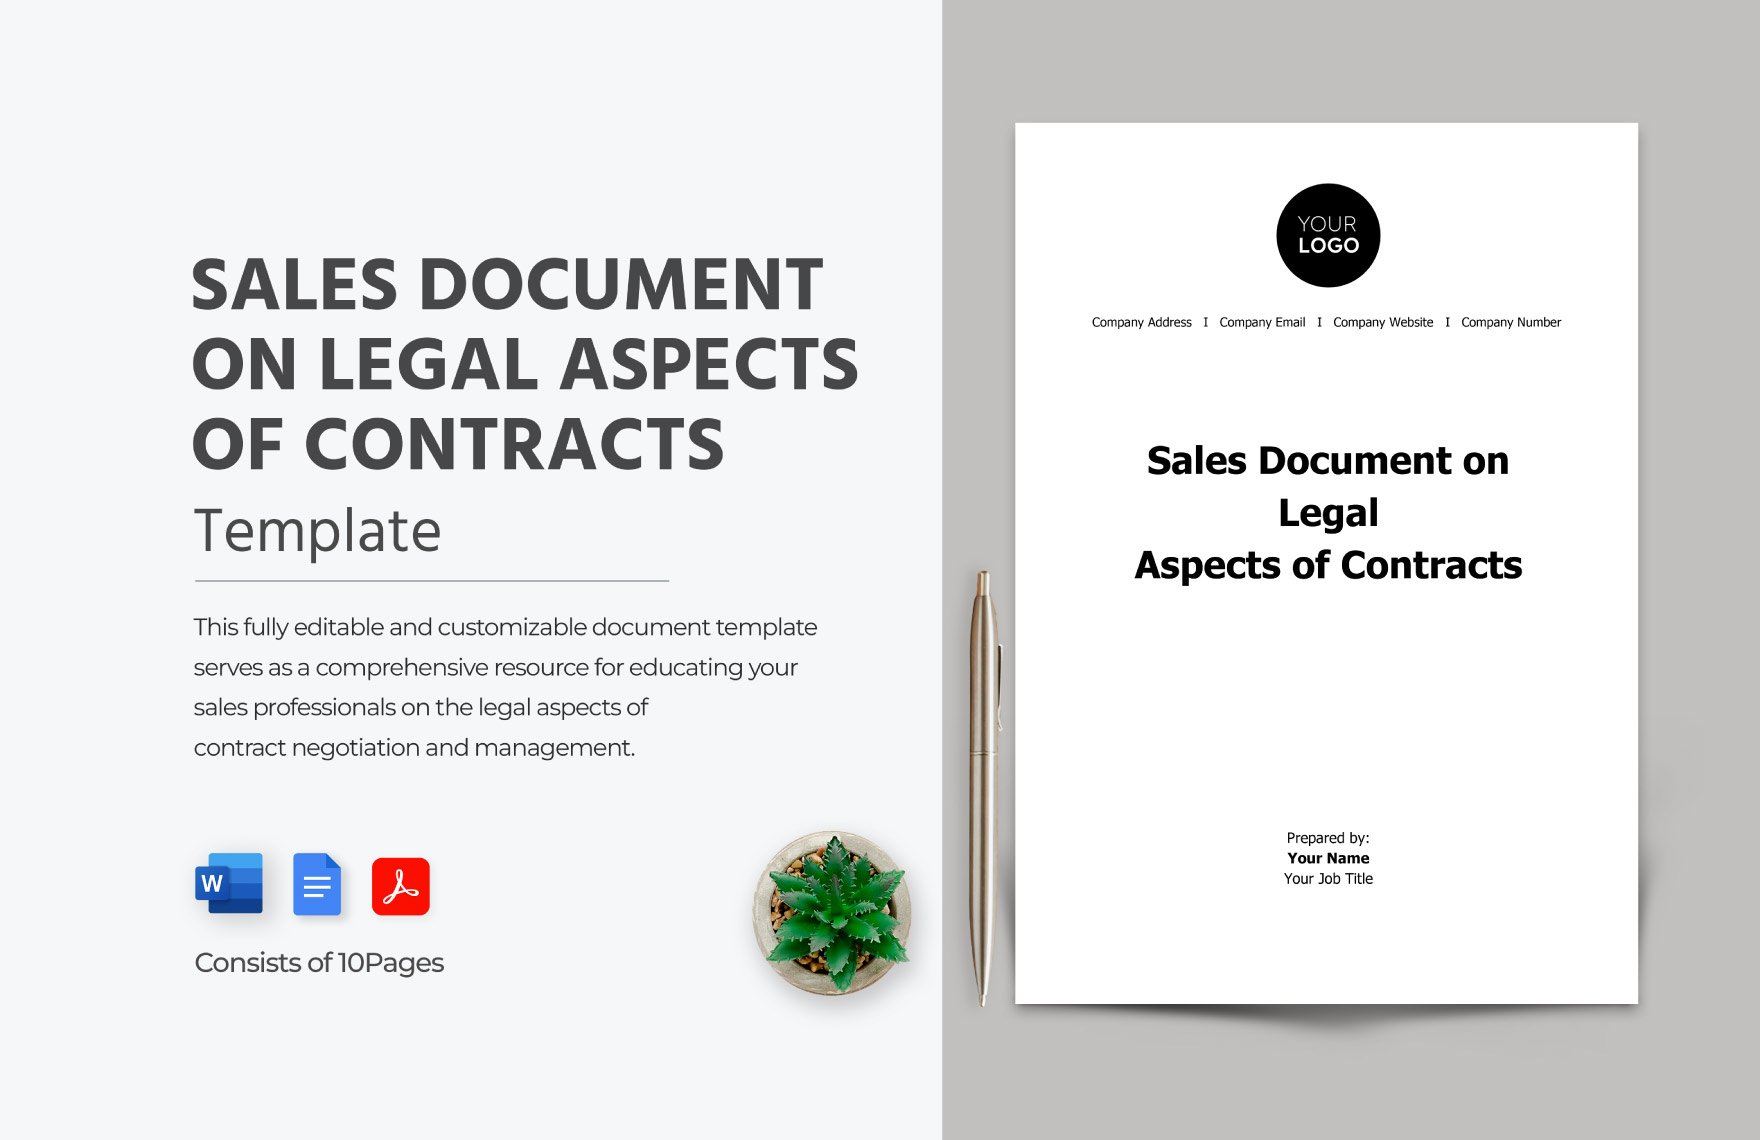 Sales Document on Legal Aspects of Contracts Template